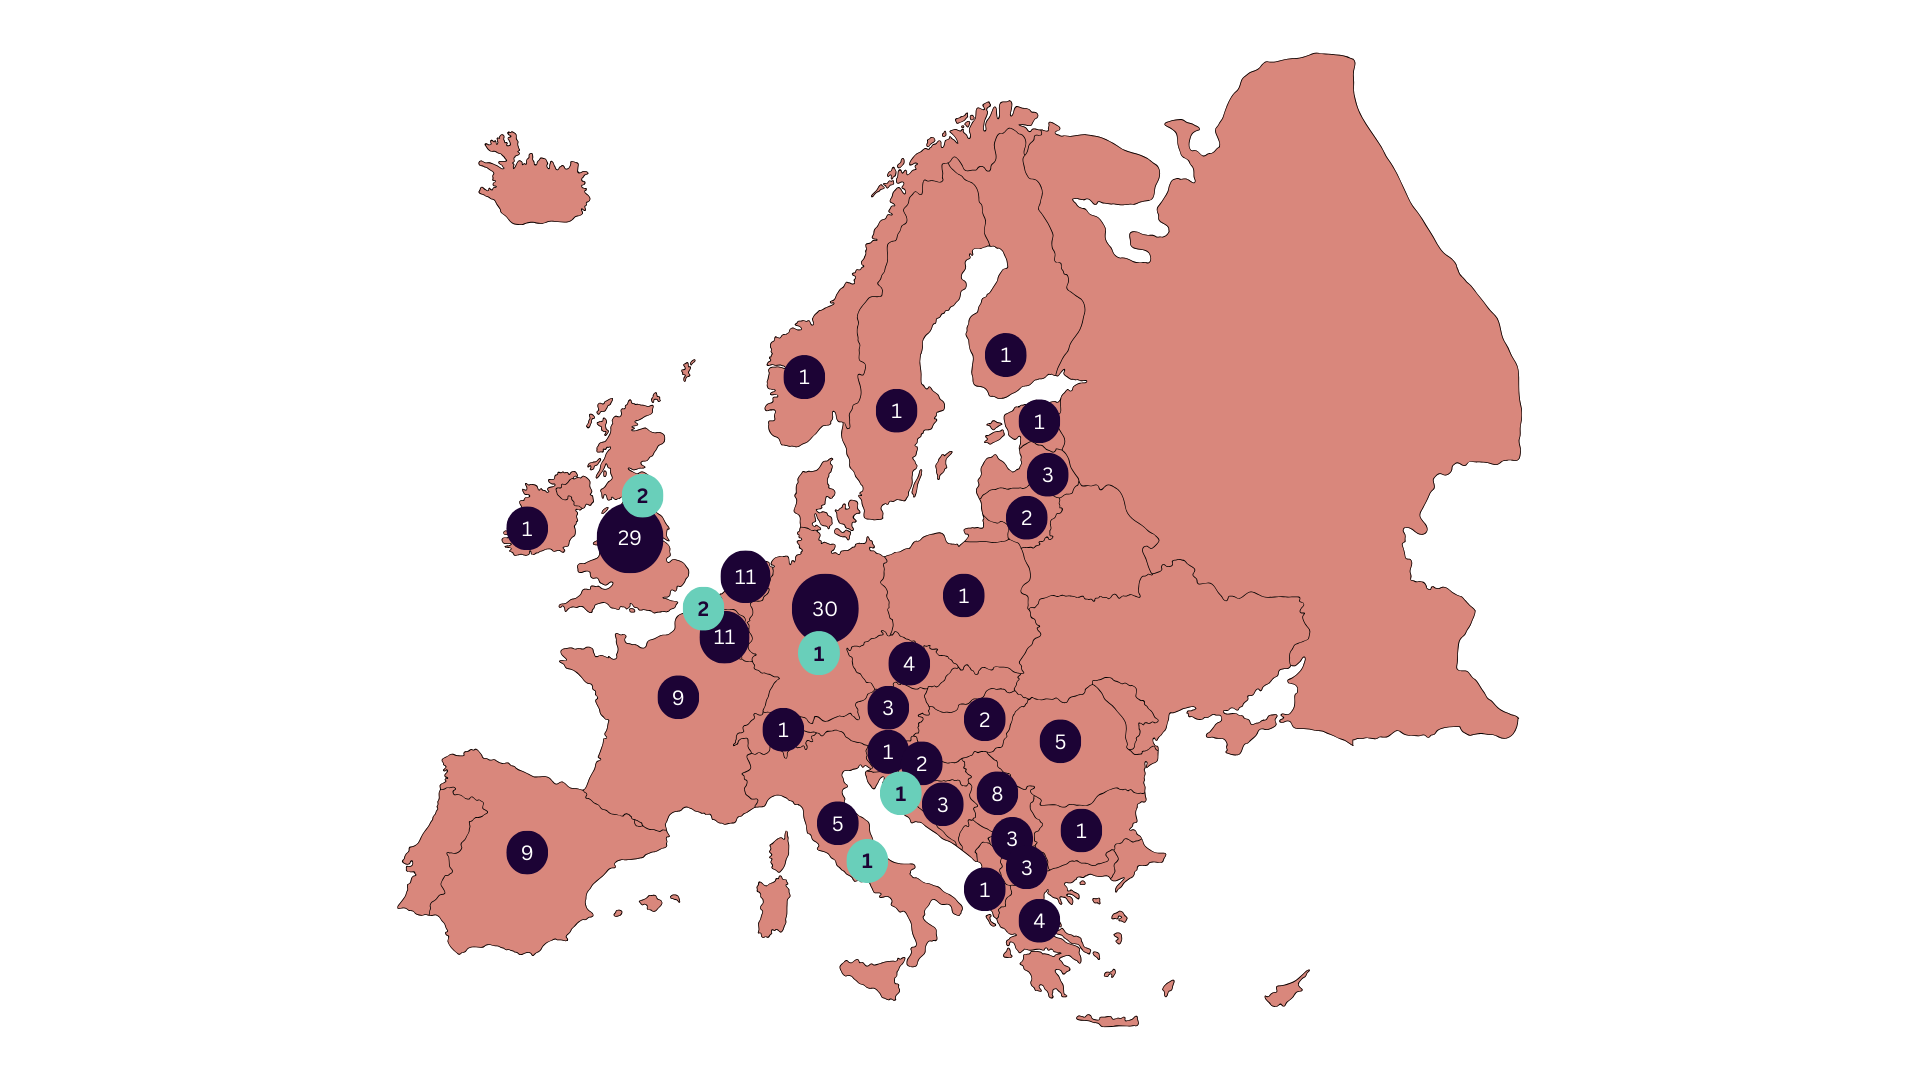 The image shows a map of Europe and the geographical distribution of applications and awarded Ecosystem grants. 